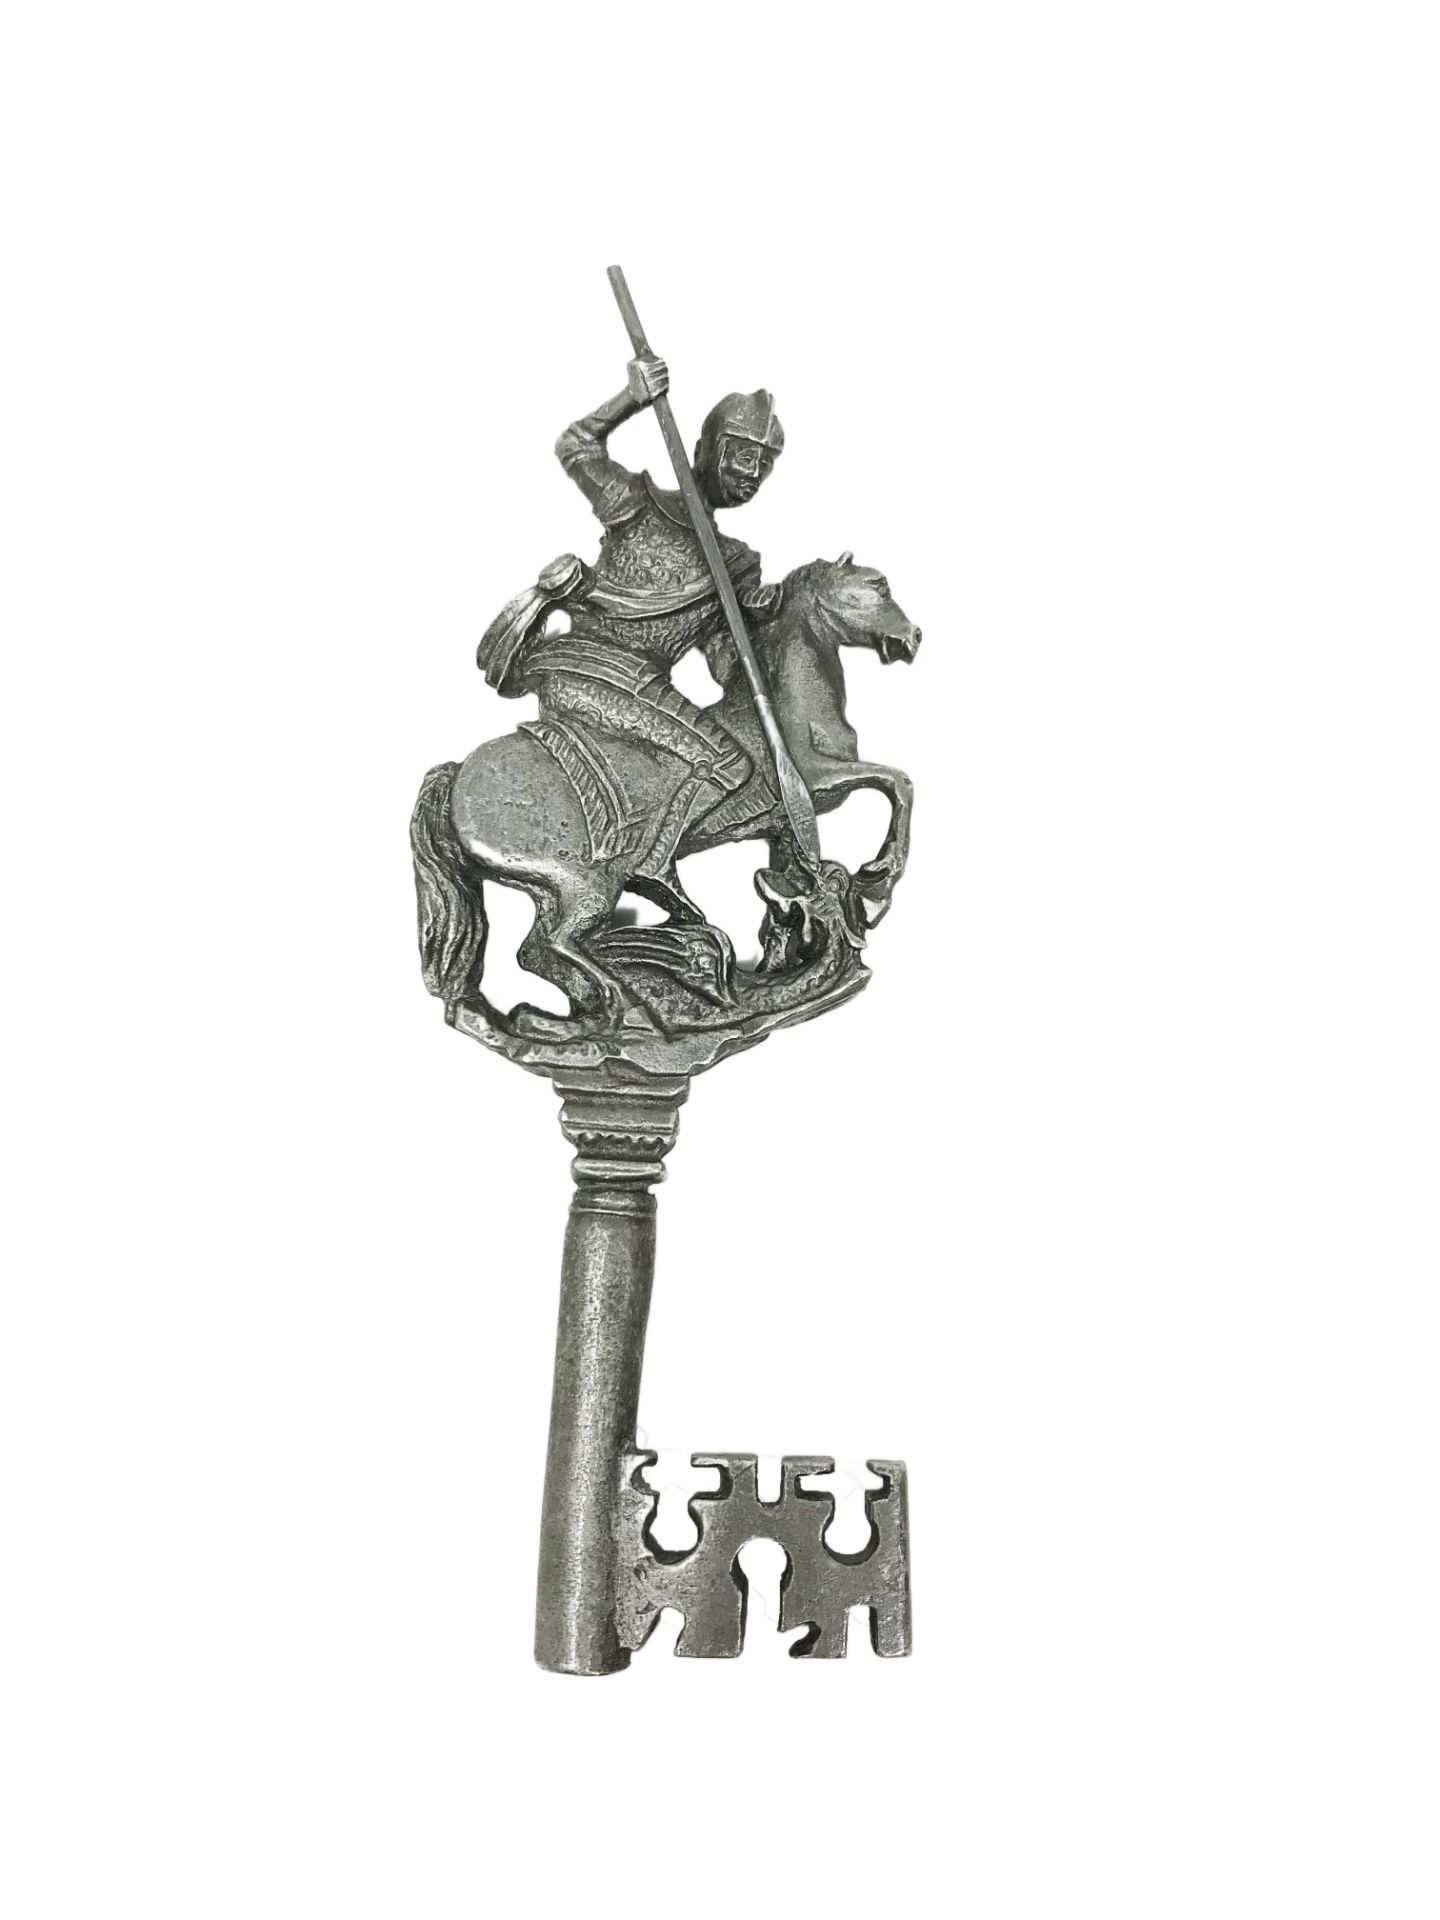 Cast metal gothic style key, decorated with Saint Michael slaying the dragon.14, 83 cm. Part of